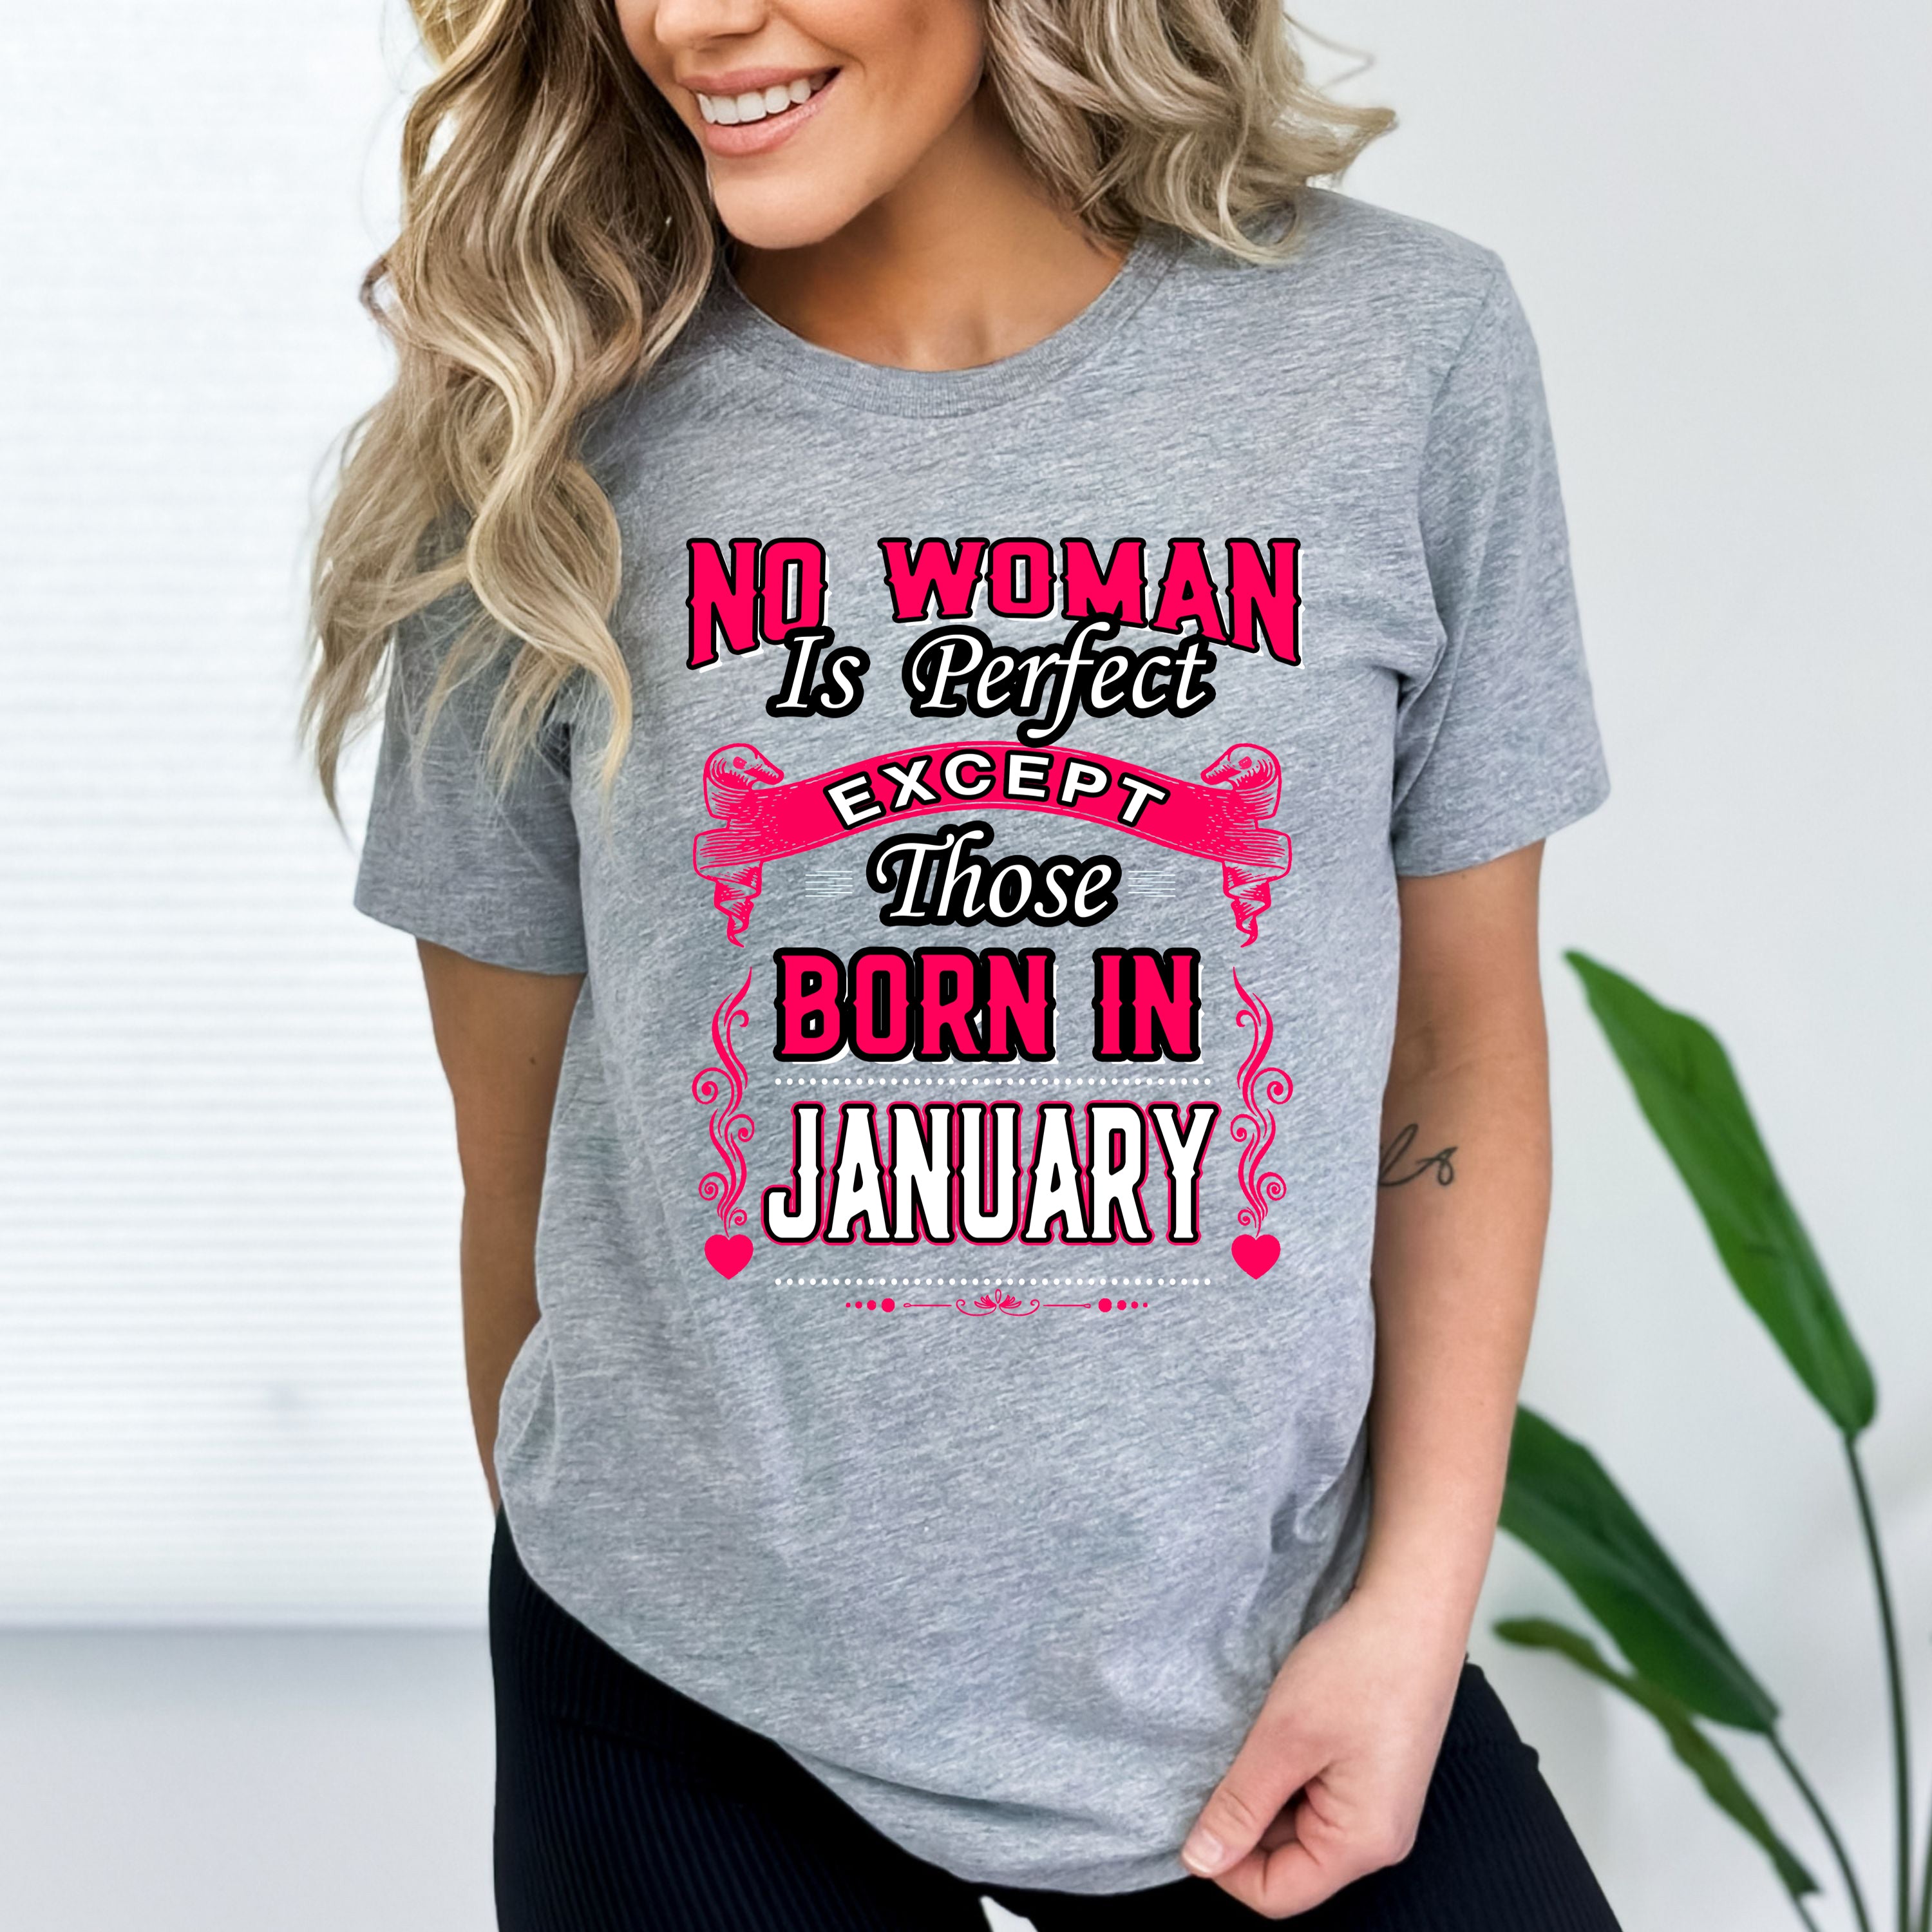 "No Woman Is Perfect Except Those Born In January"